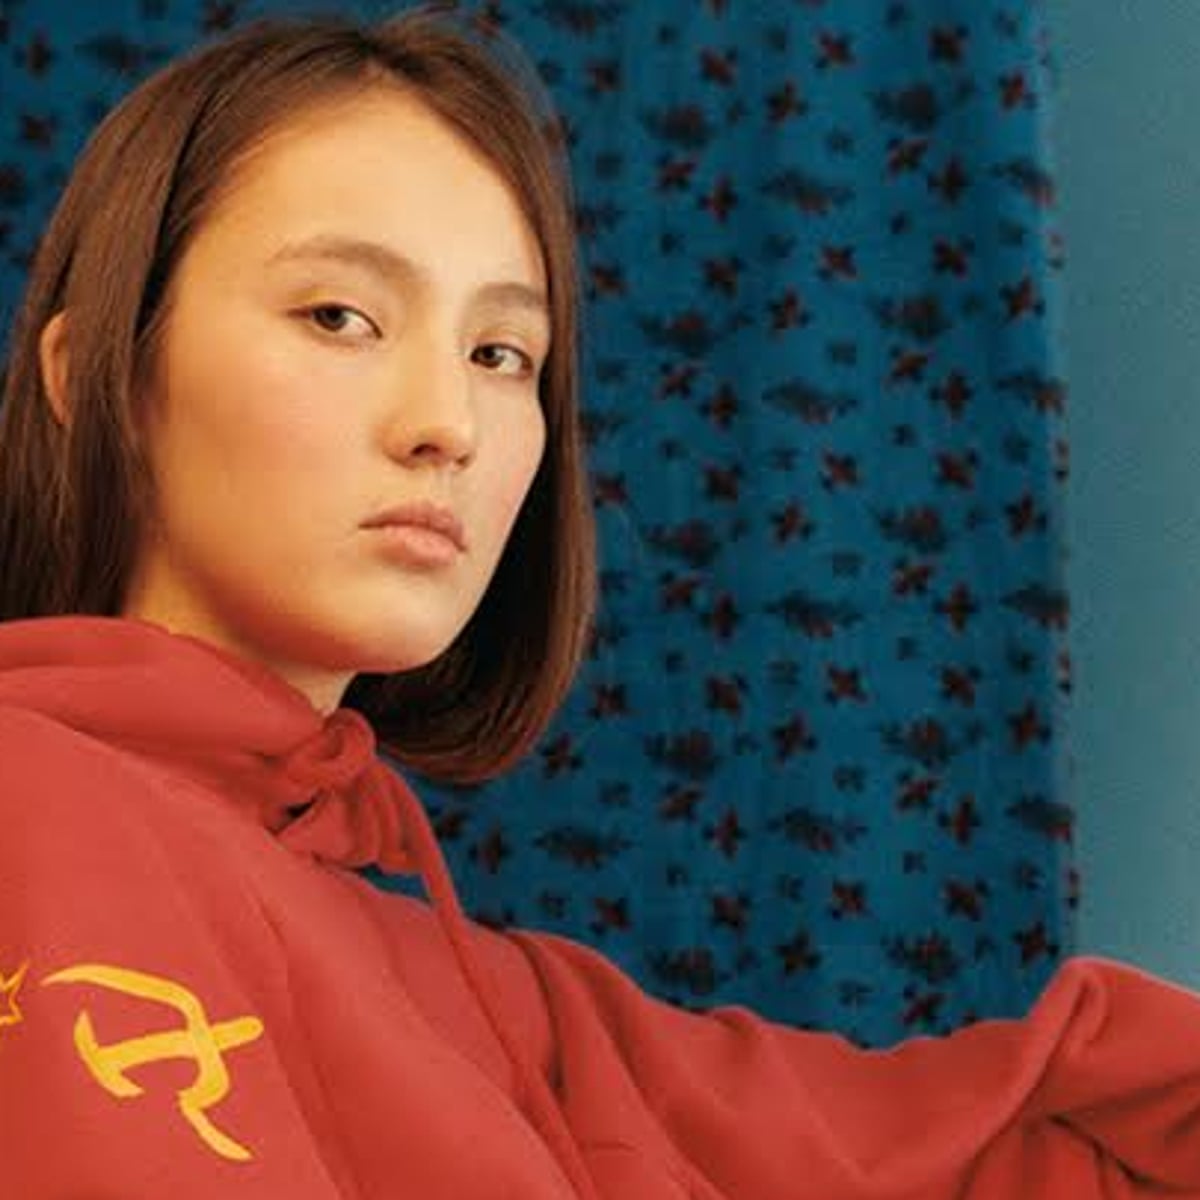 hardware tack kold Kim Kardashian and the fashionistas: drop the hammer and sickle |  Anastasiia Fedorova for the Calvert Journal, part of the New East network |  The Guardian